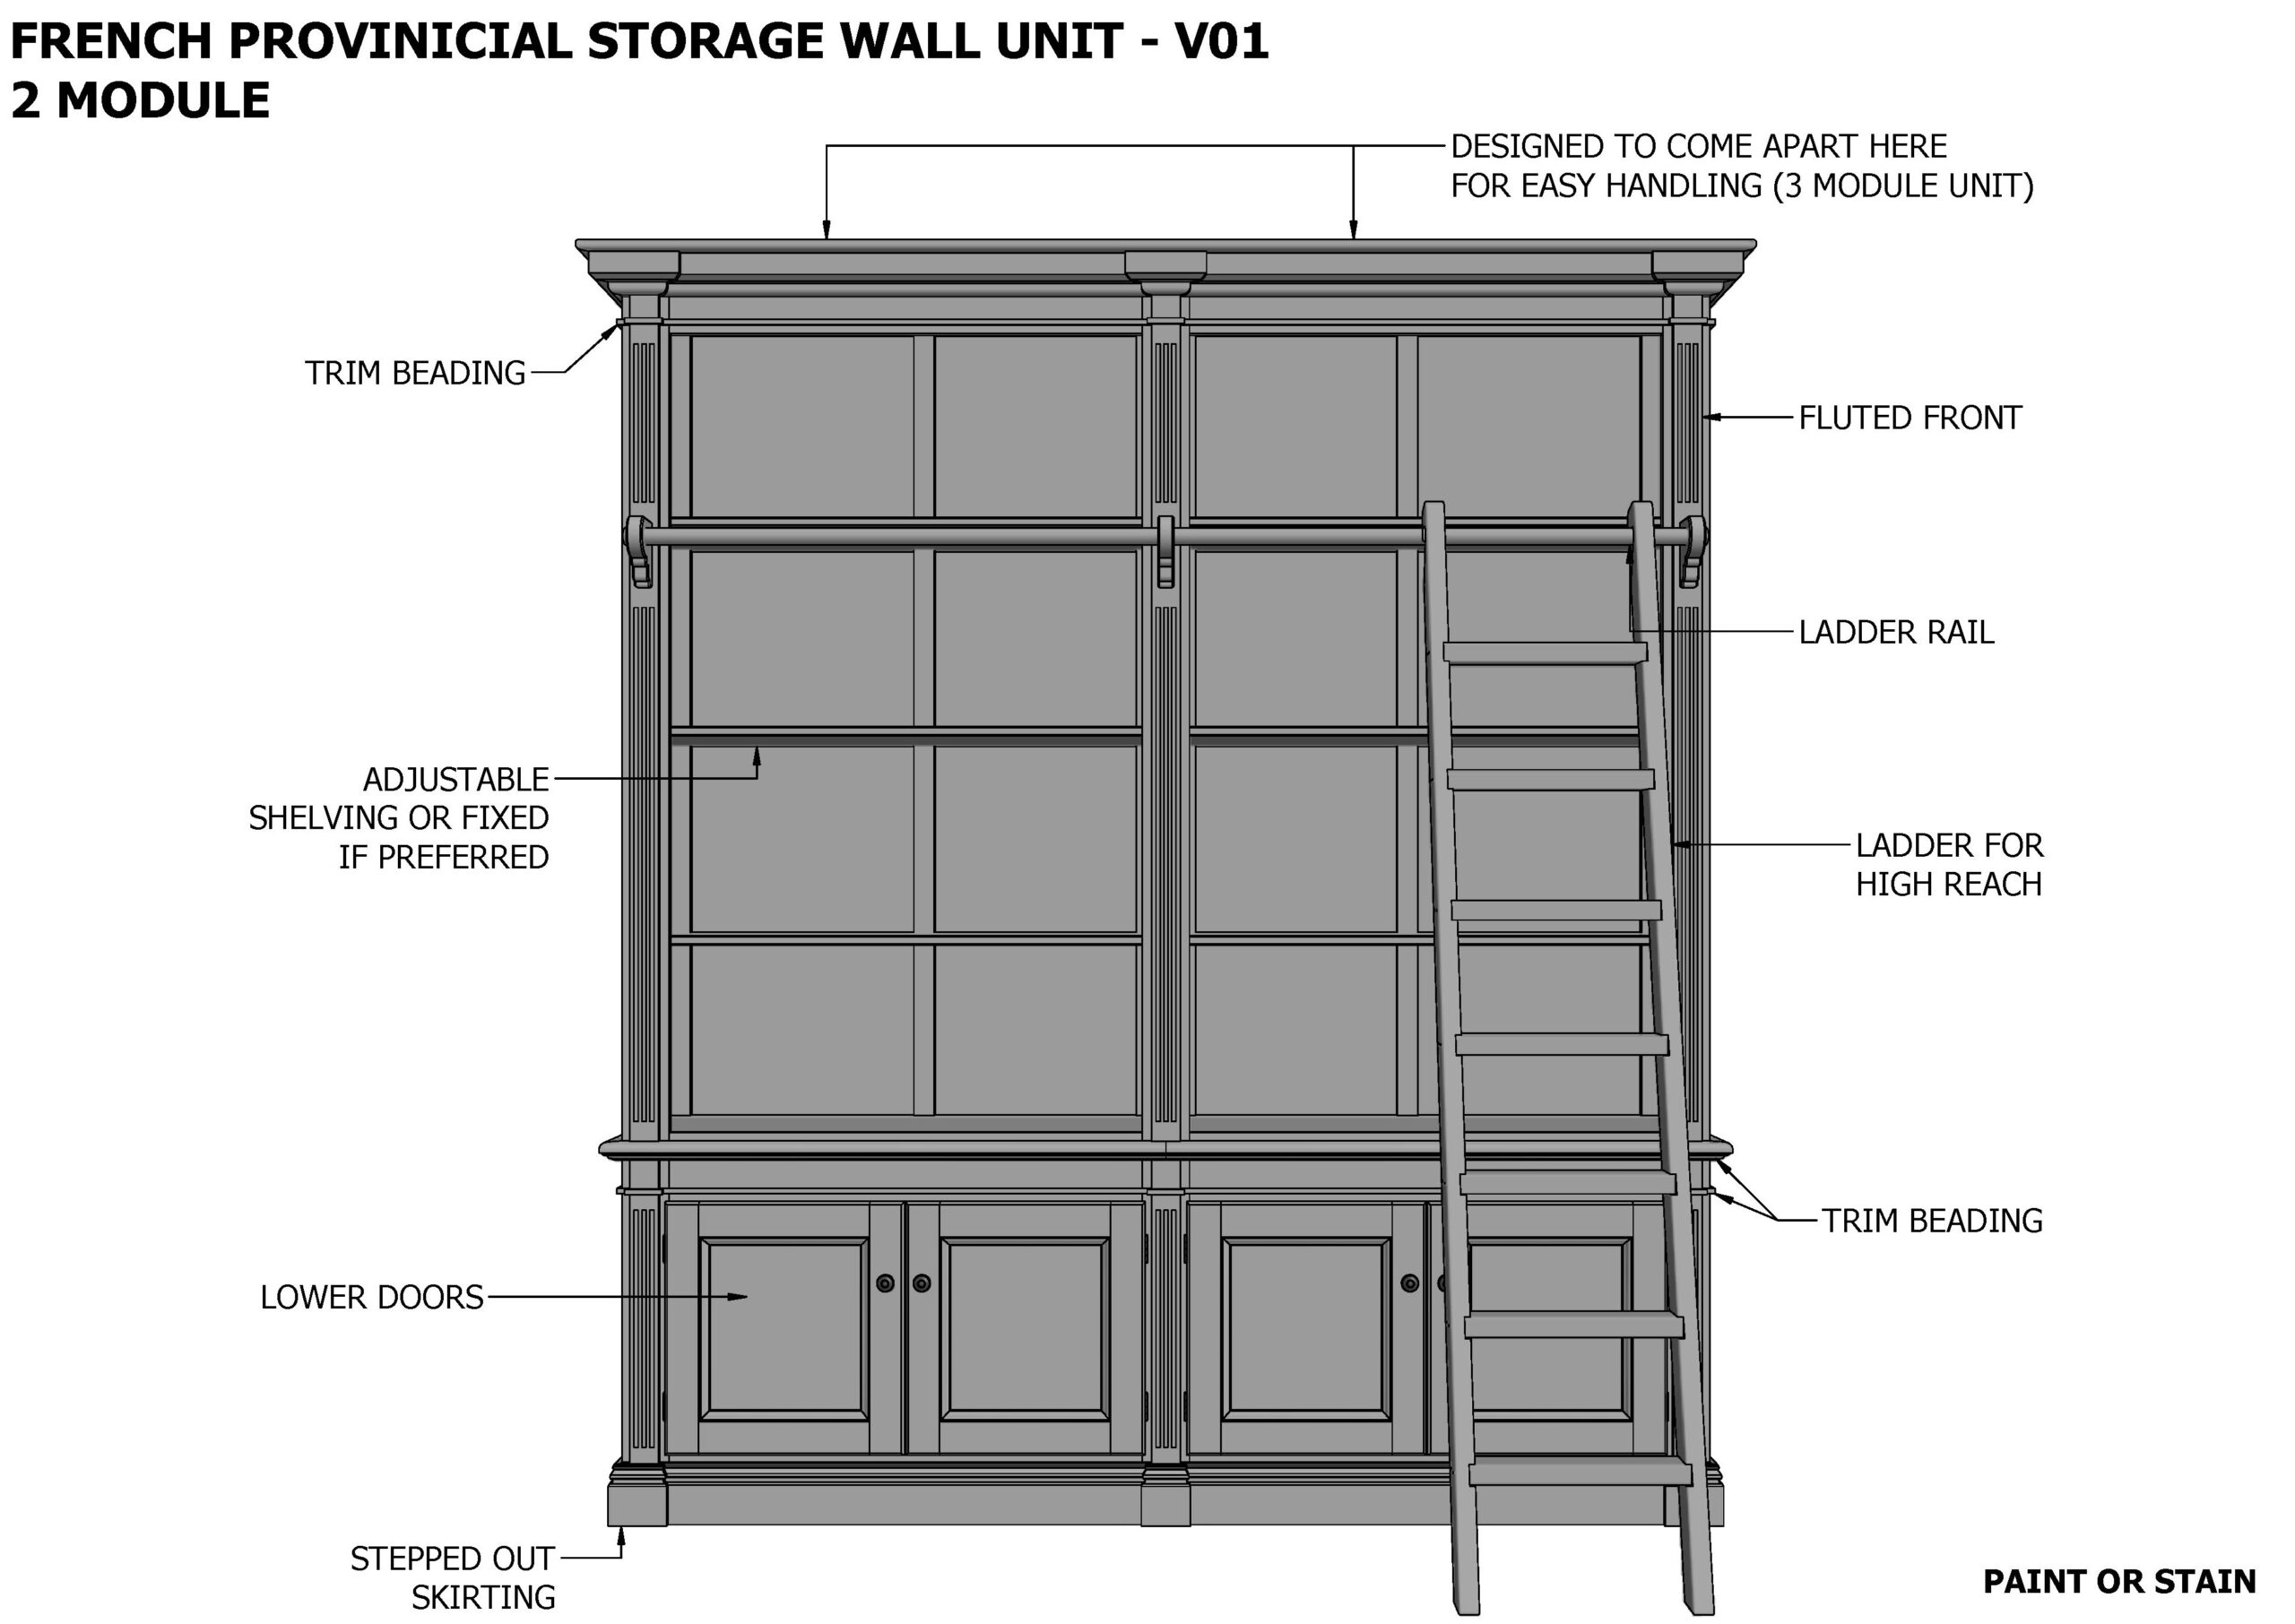 FRENCH PROVINCIAL WALL UNIT 2 MODULE (Building Plans ONLY)